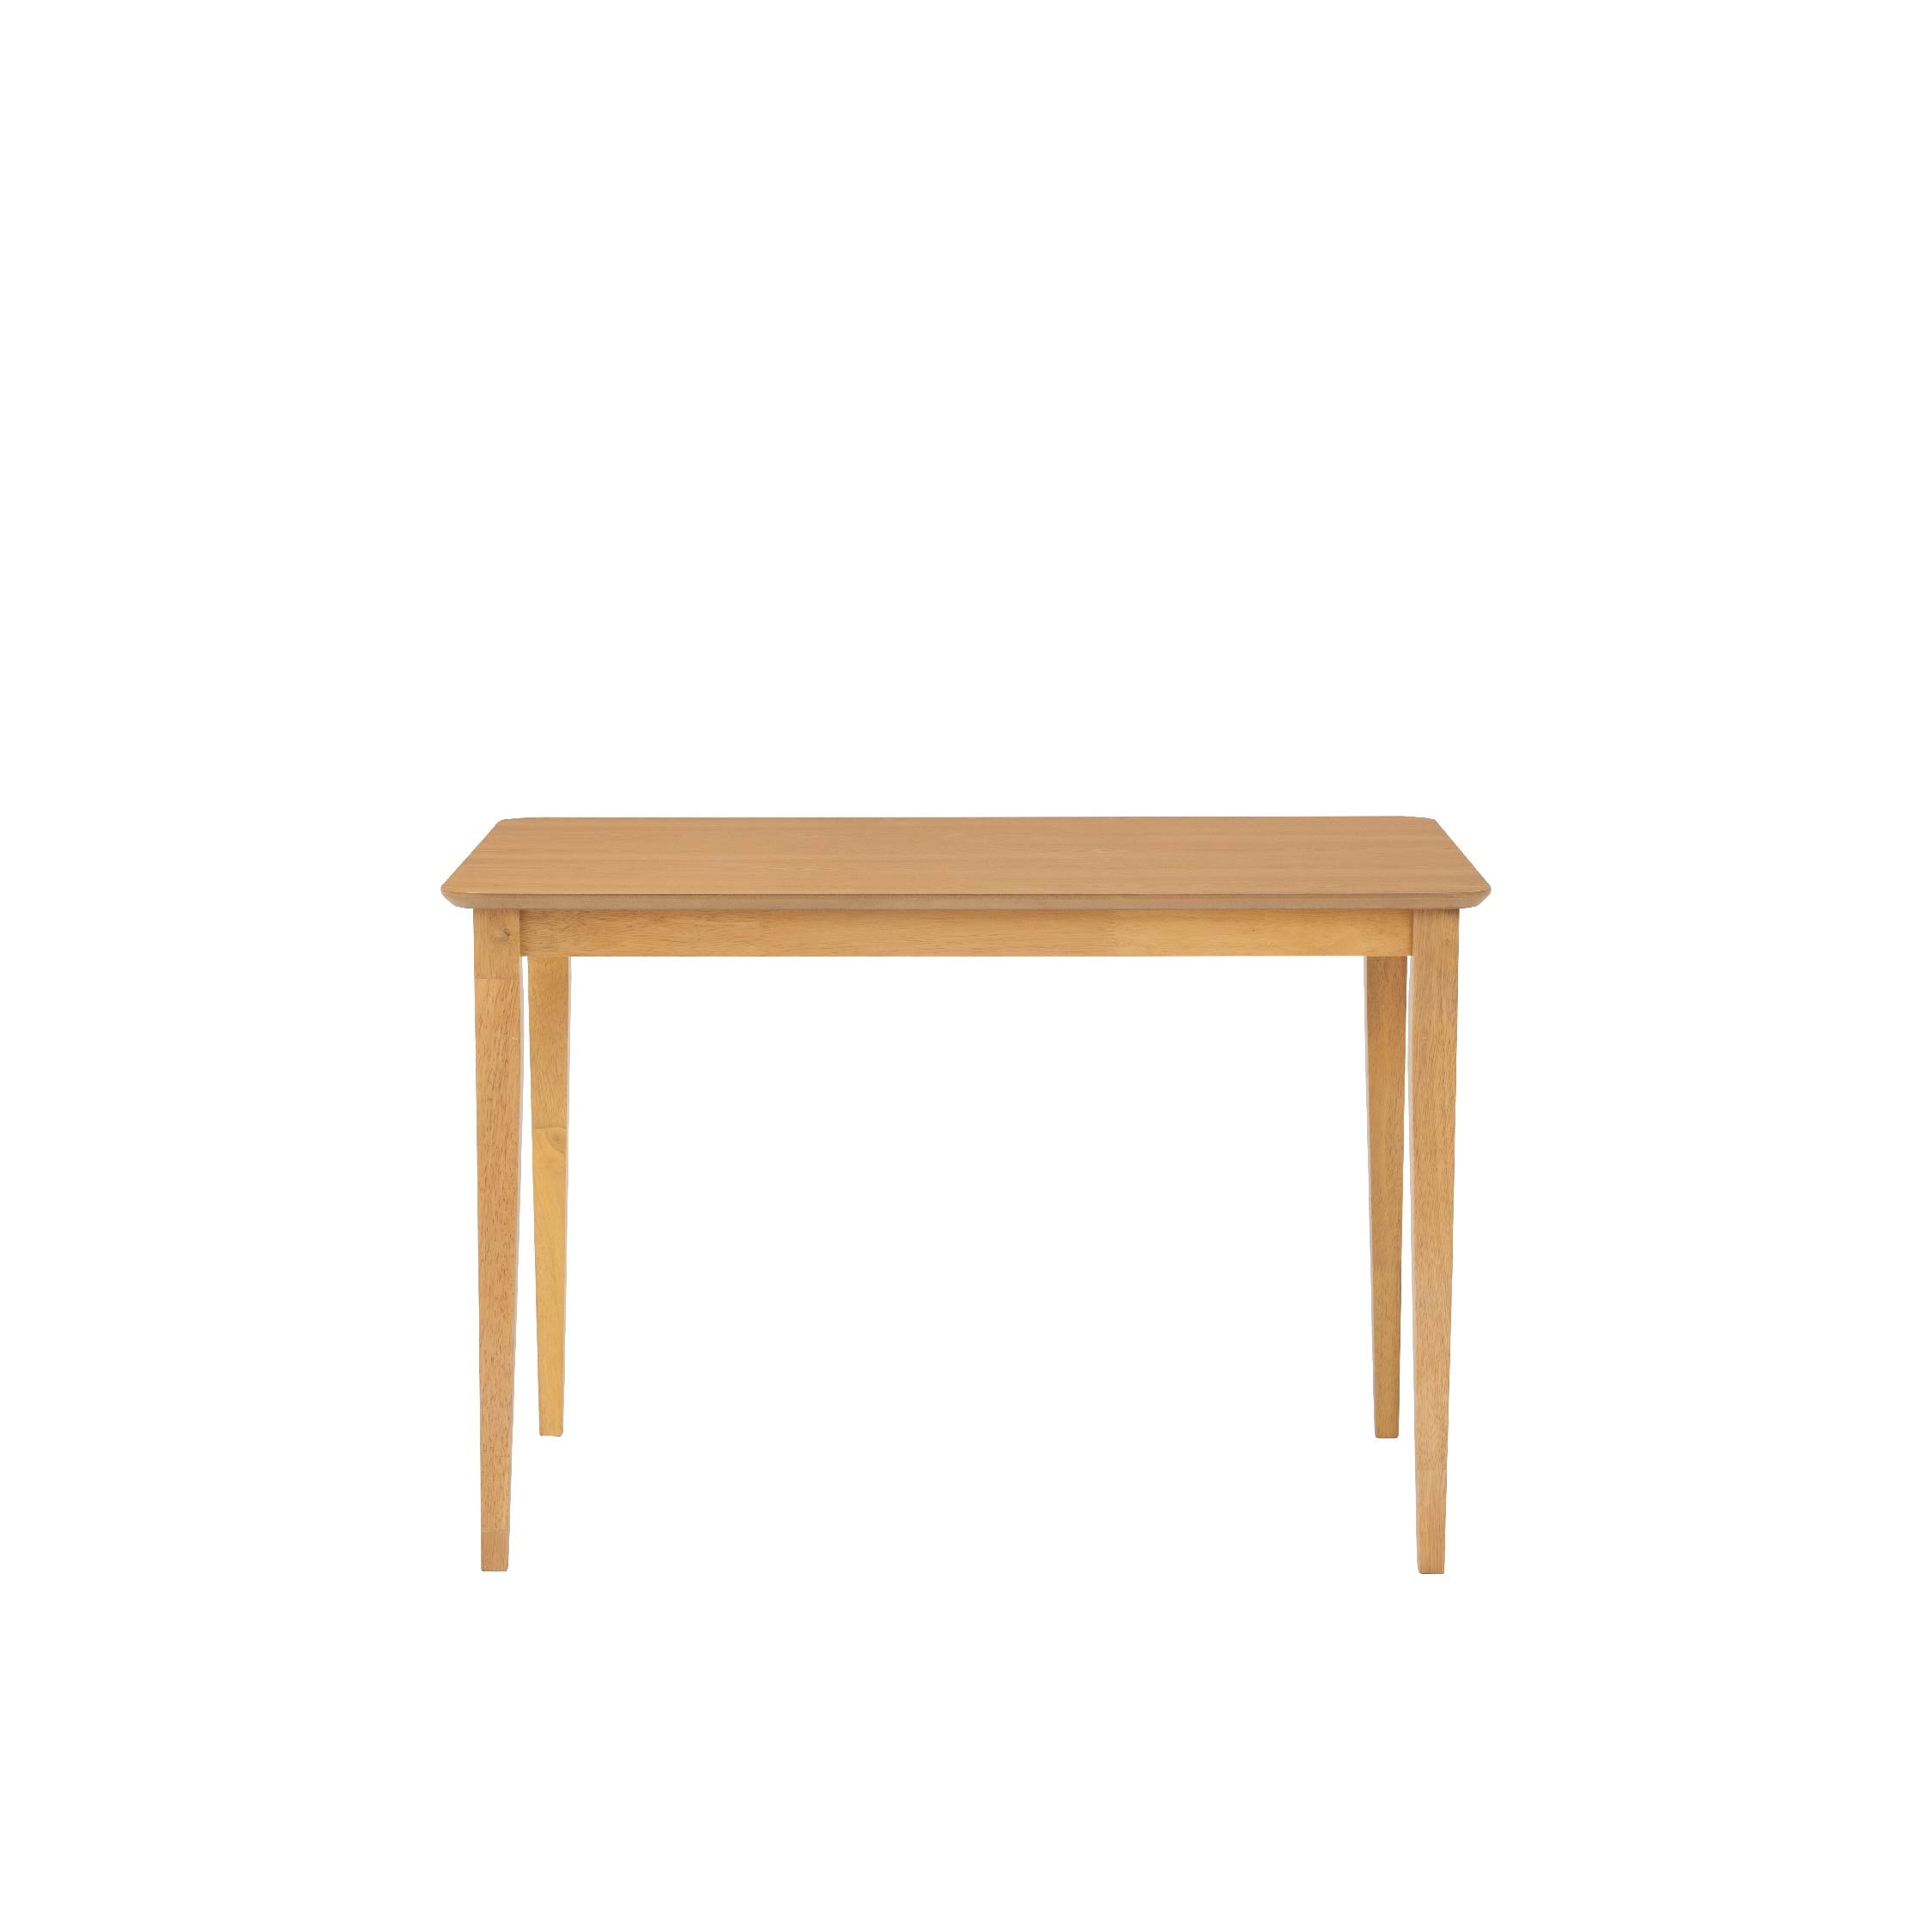 BASIC Dining Table 1.1m